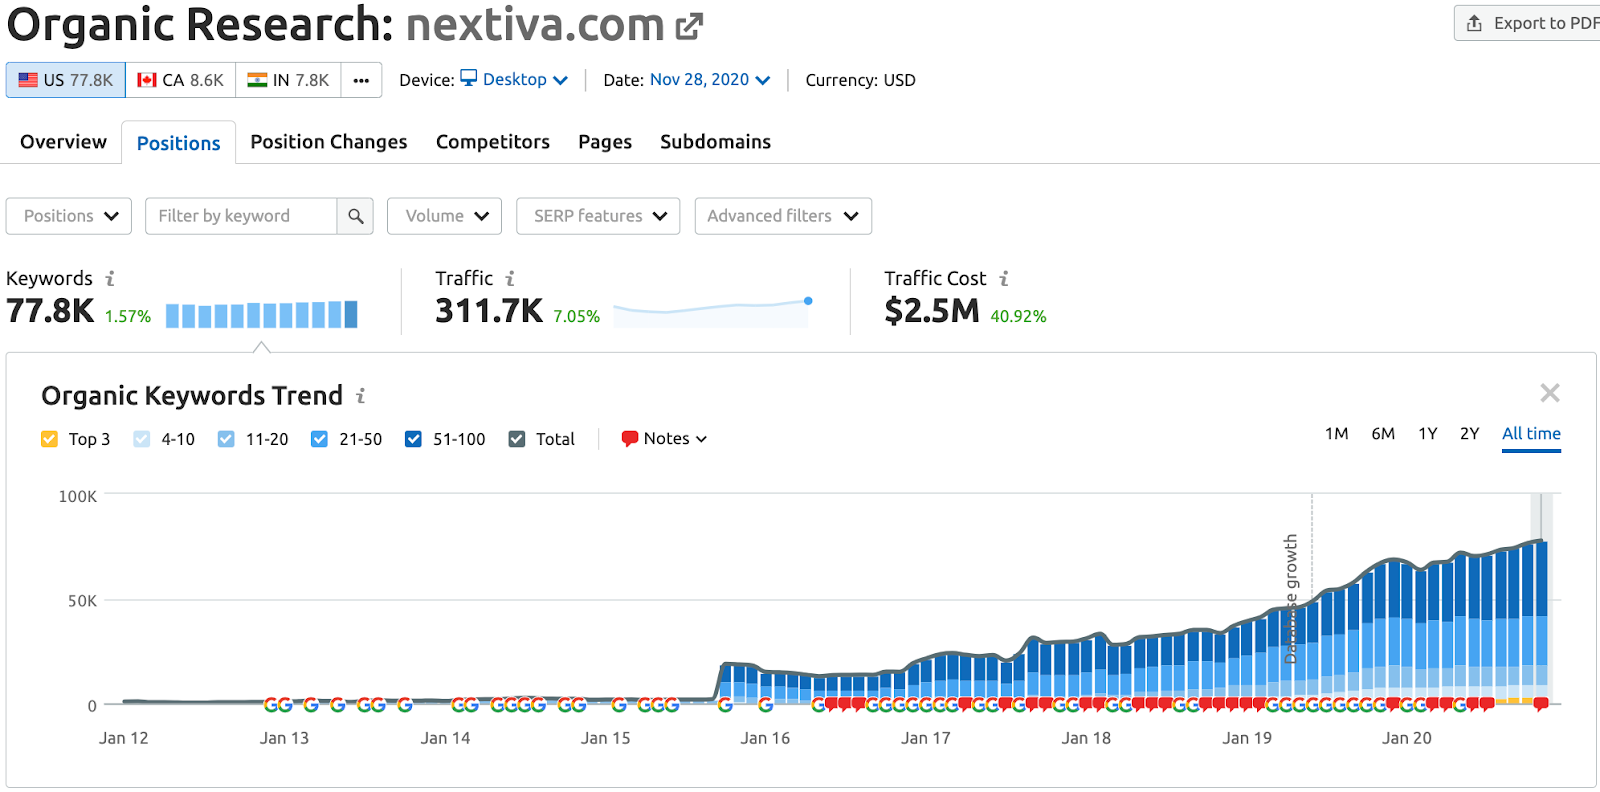 organic research page for nextiva